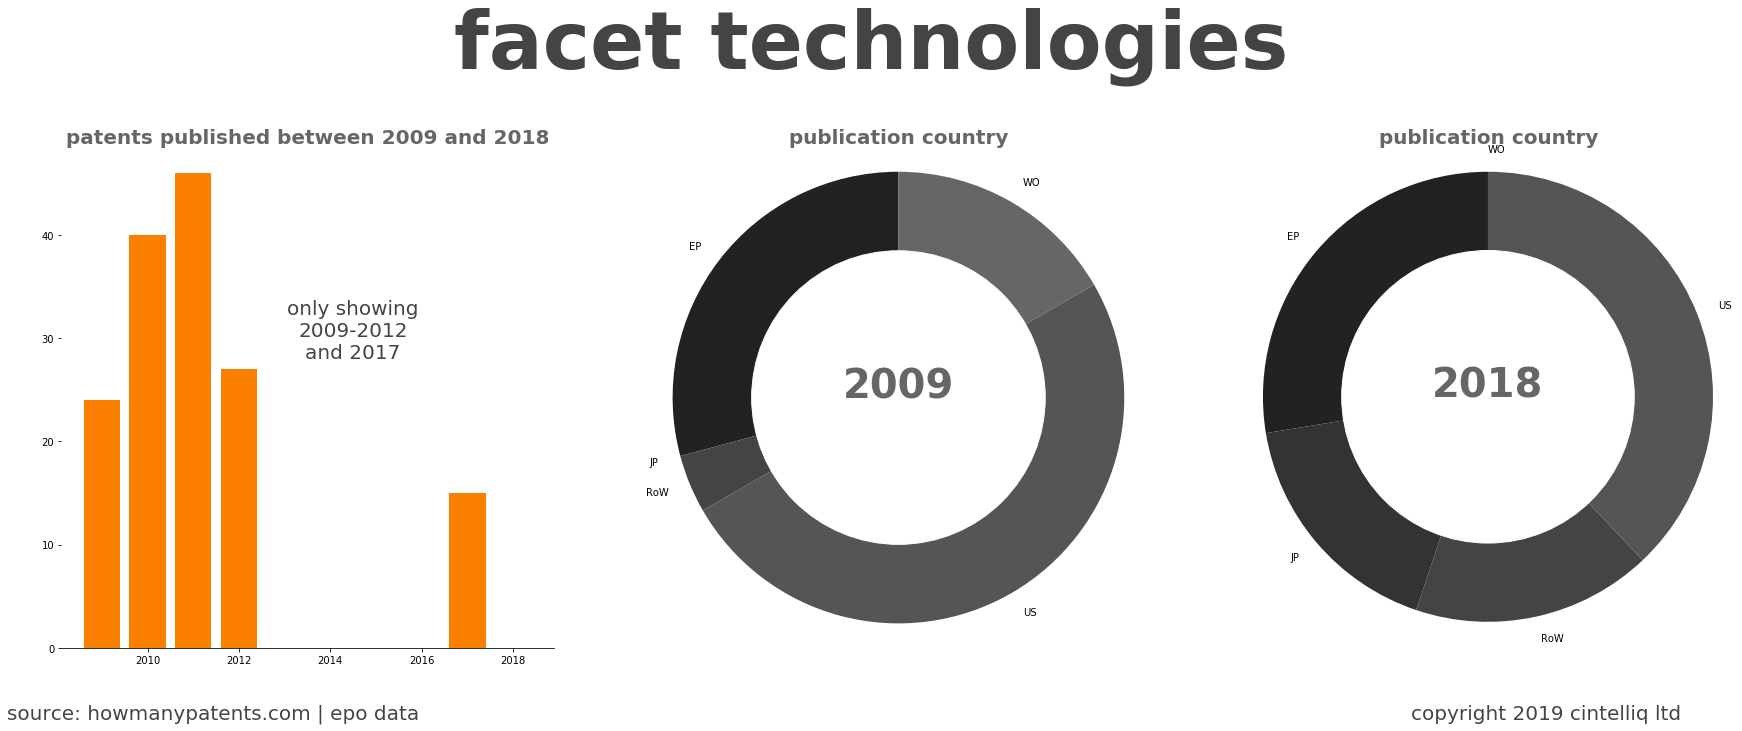 summary of patents for Facet Technologies